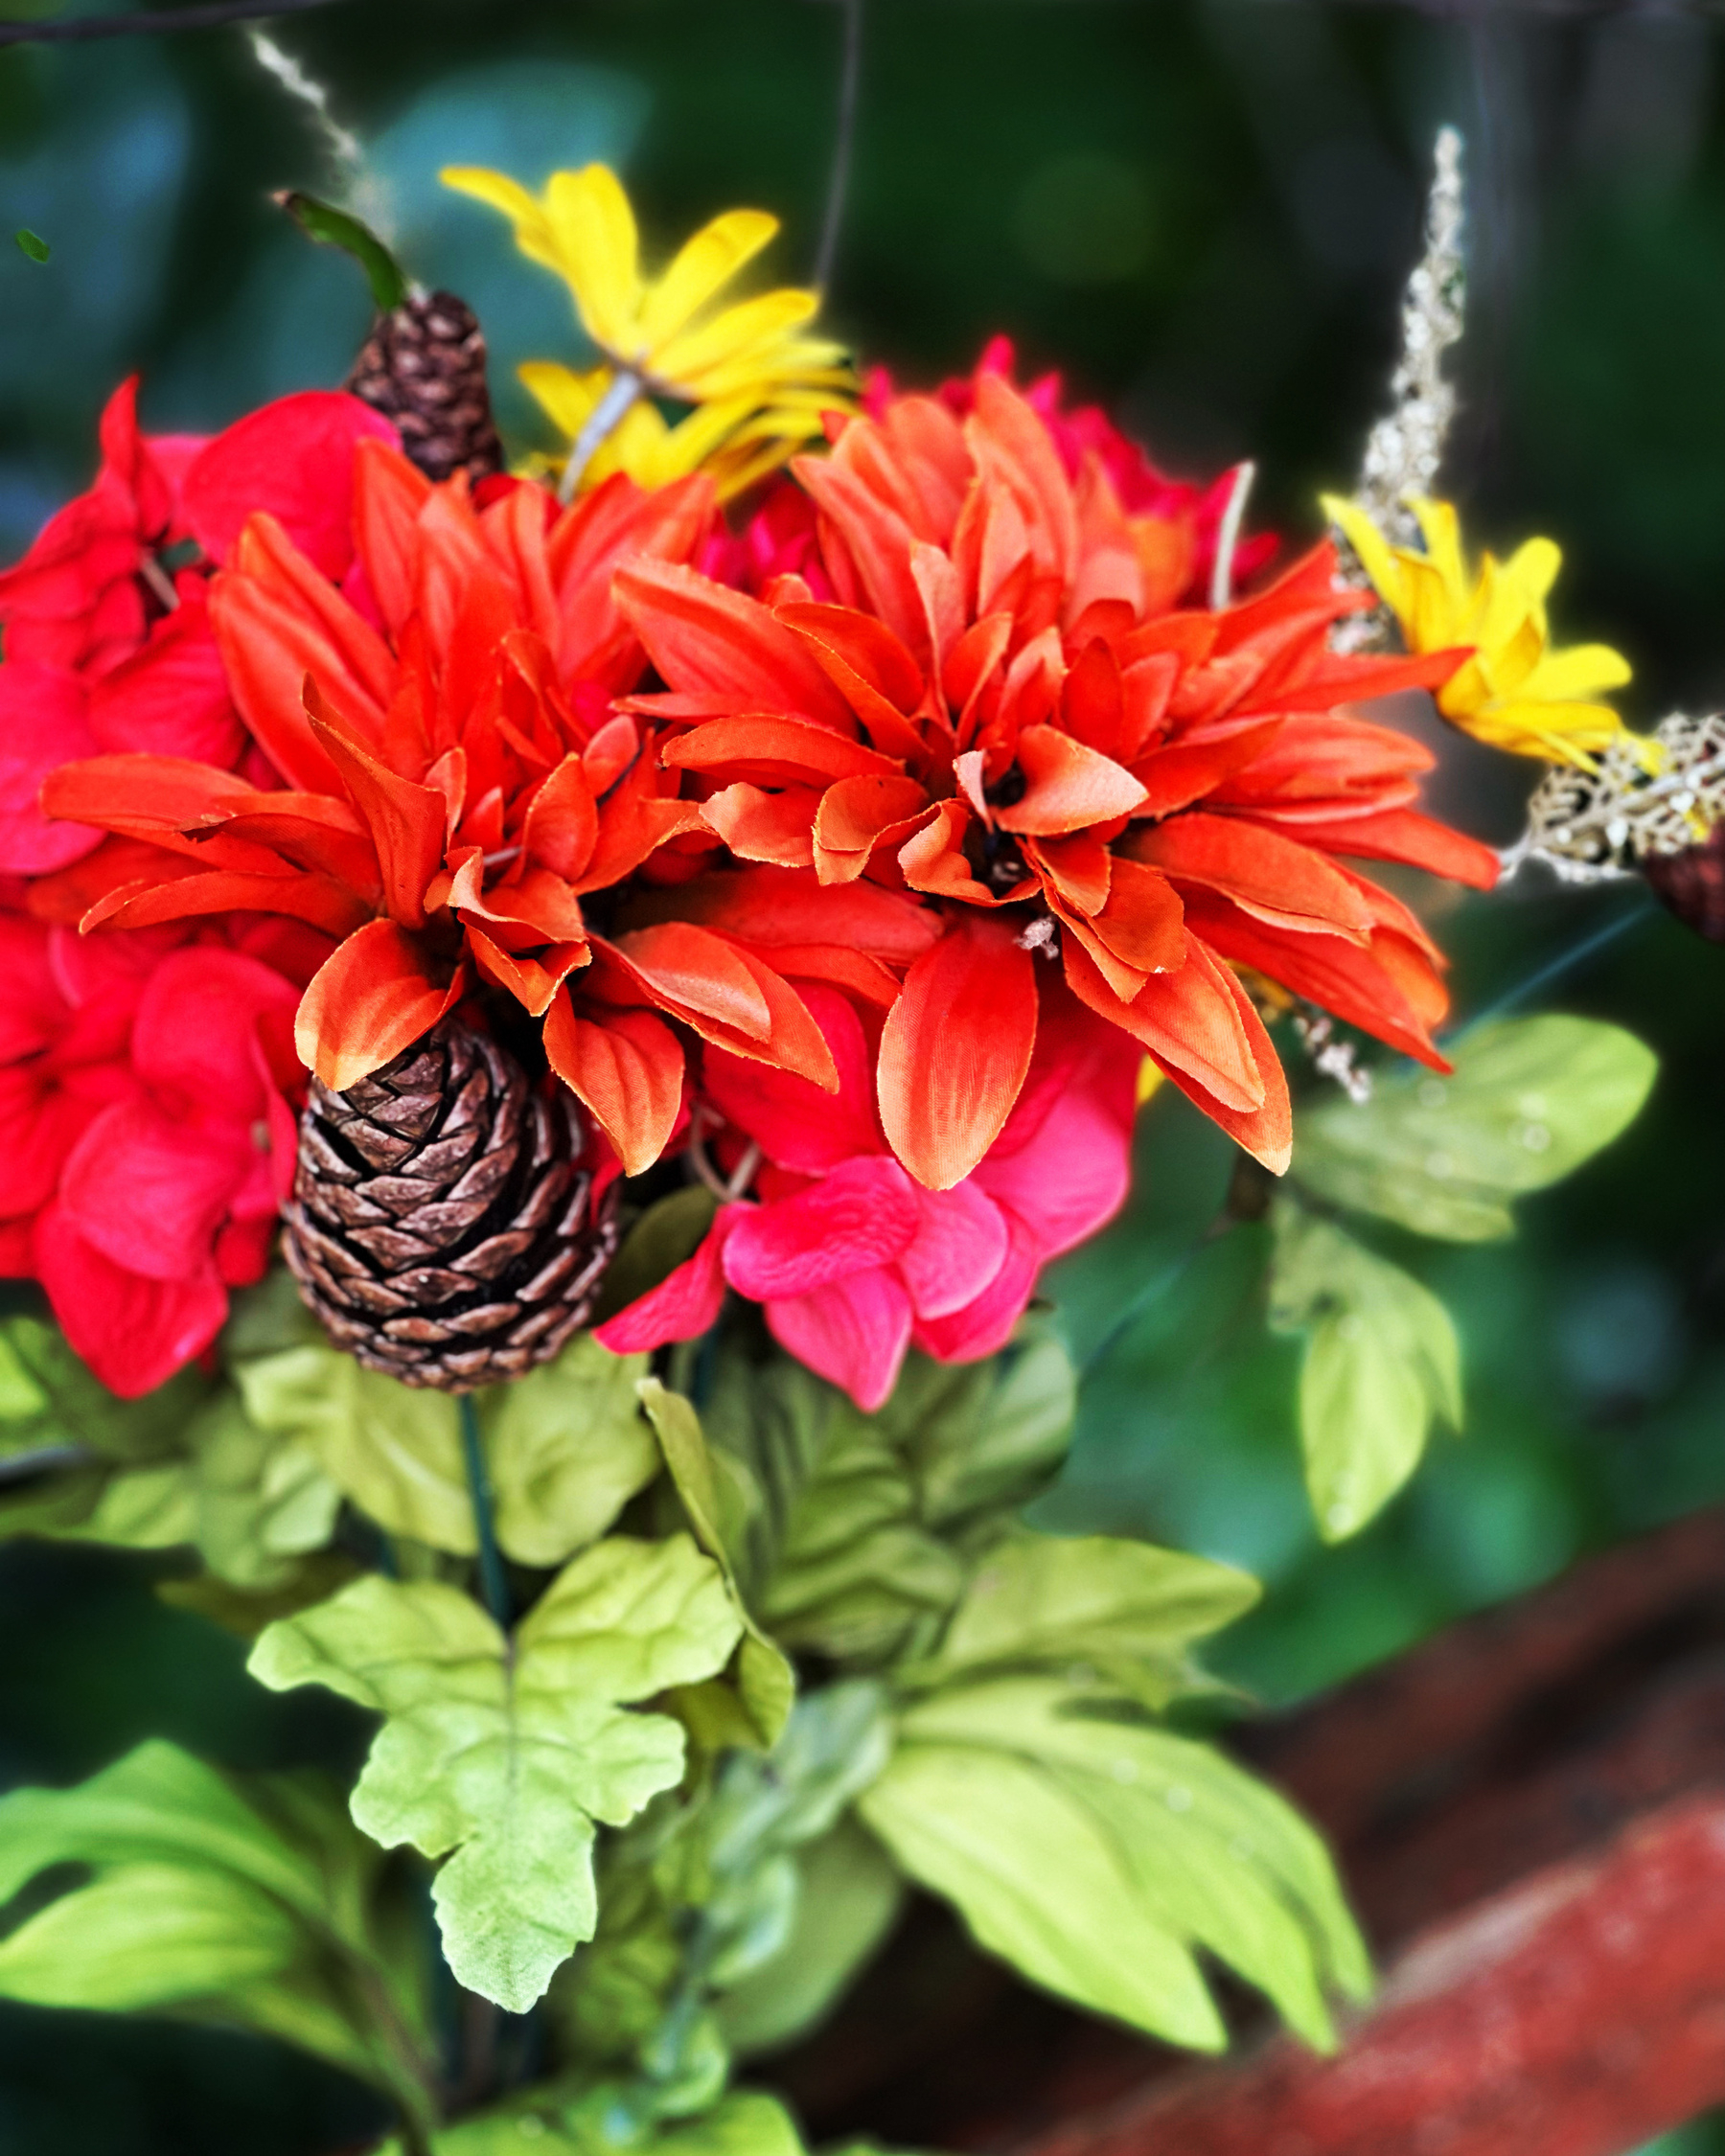 Red, yellow, pink flowers with a brown cone